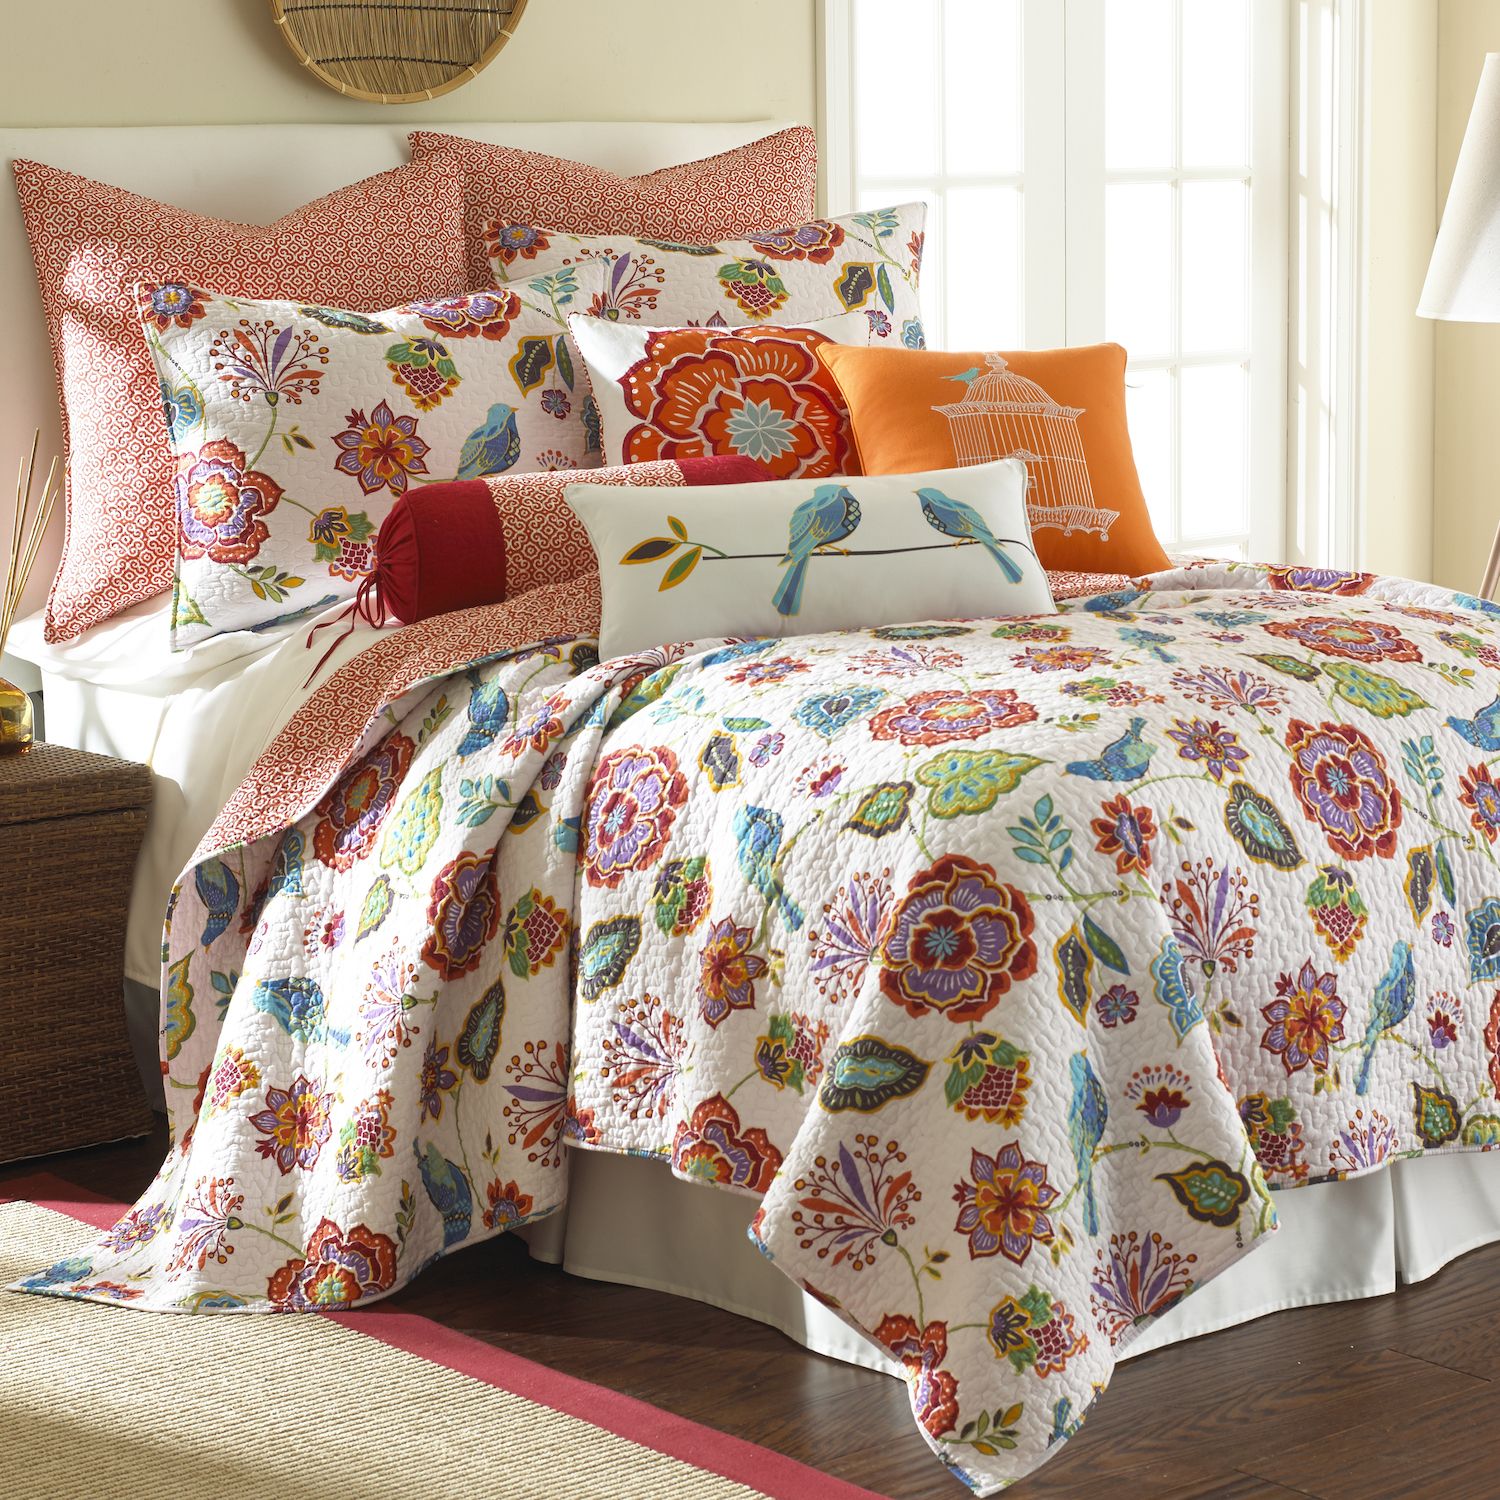 Image for Levtex Home Abigail Reversible Quilt Set at Kohl's.